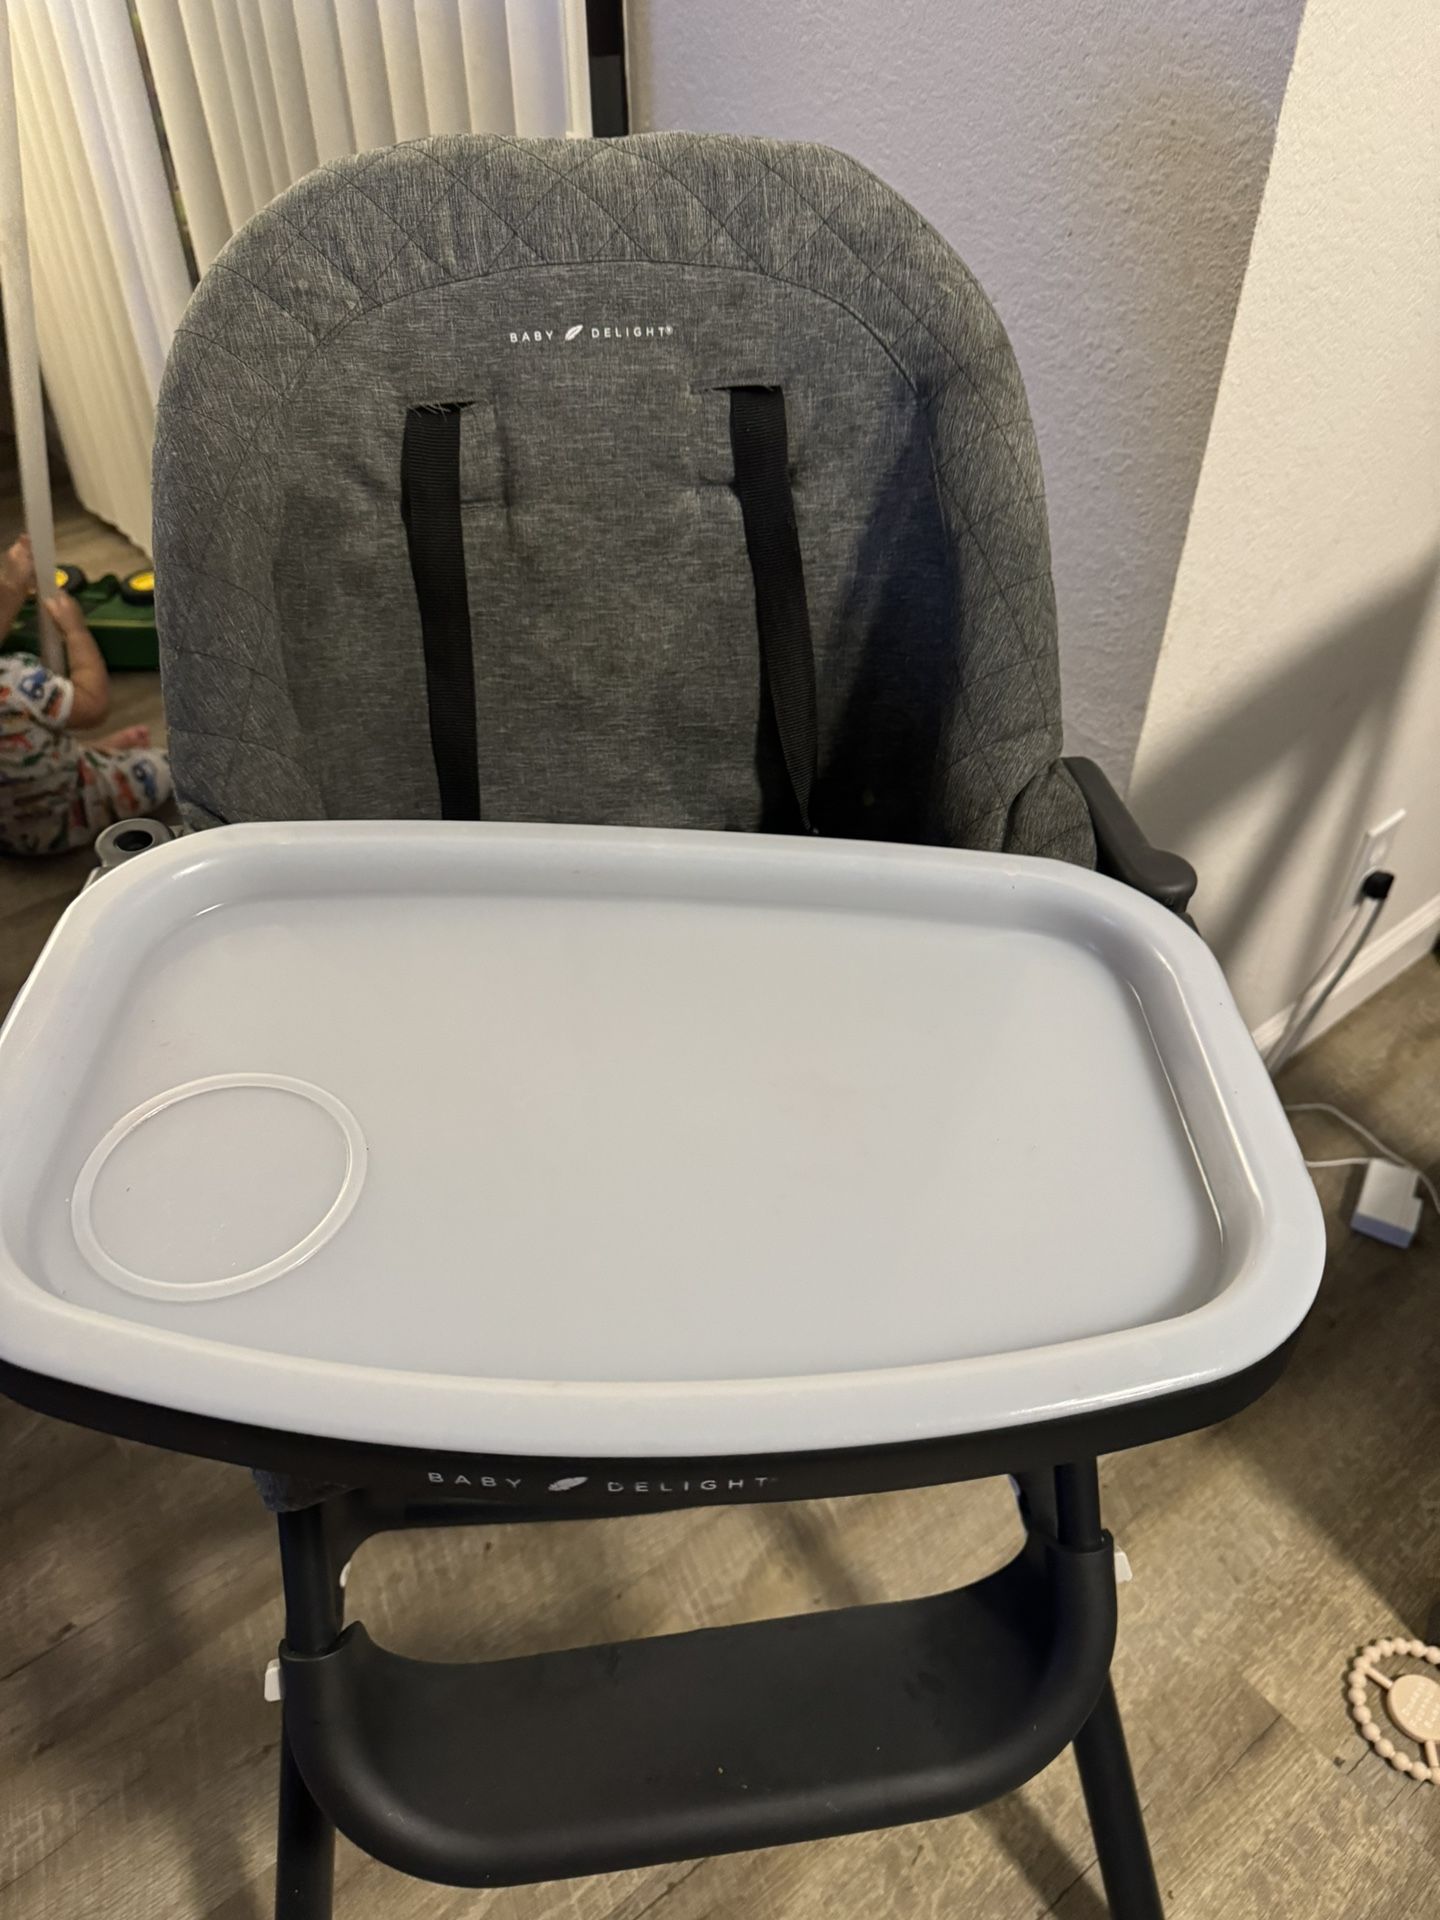 Baby Delight High Chair